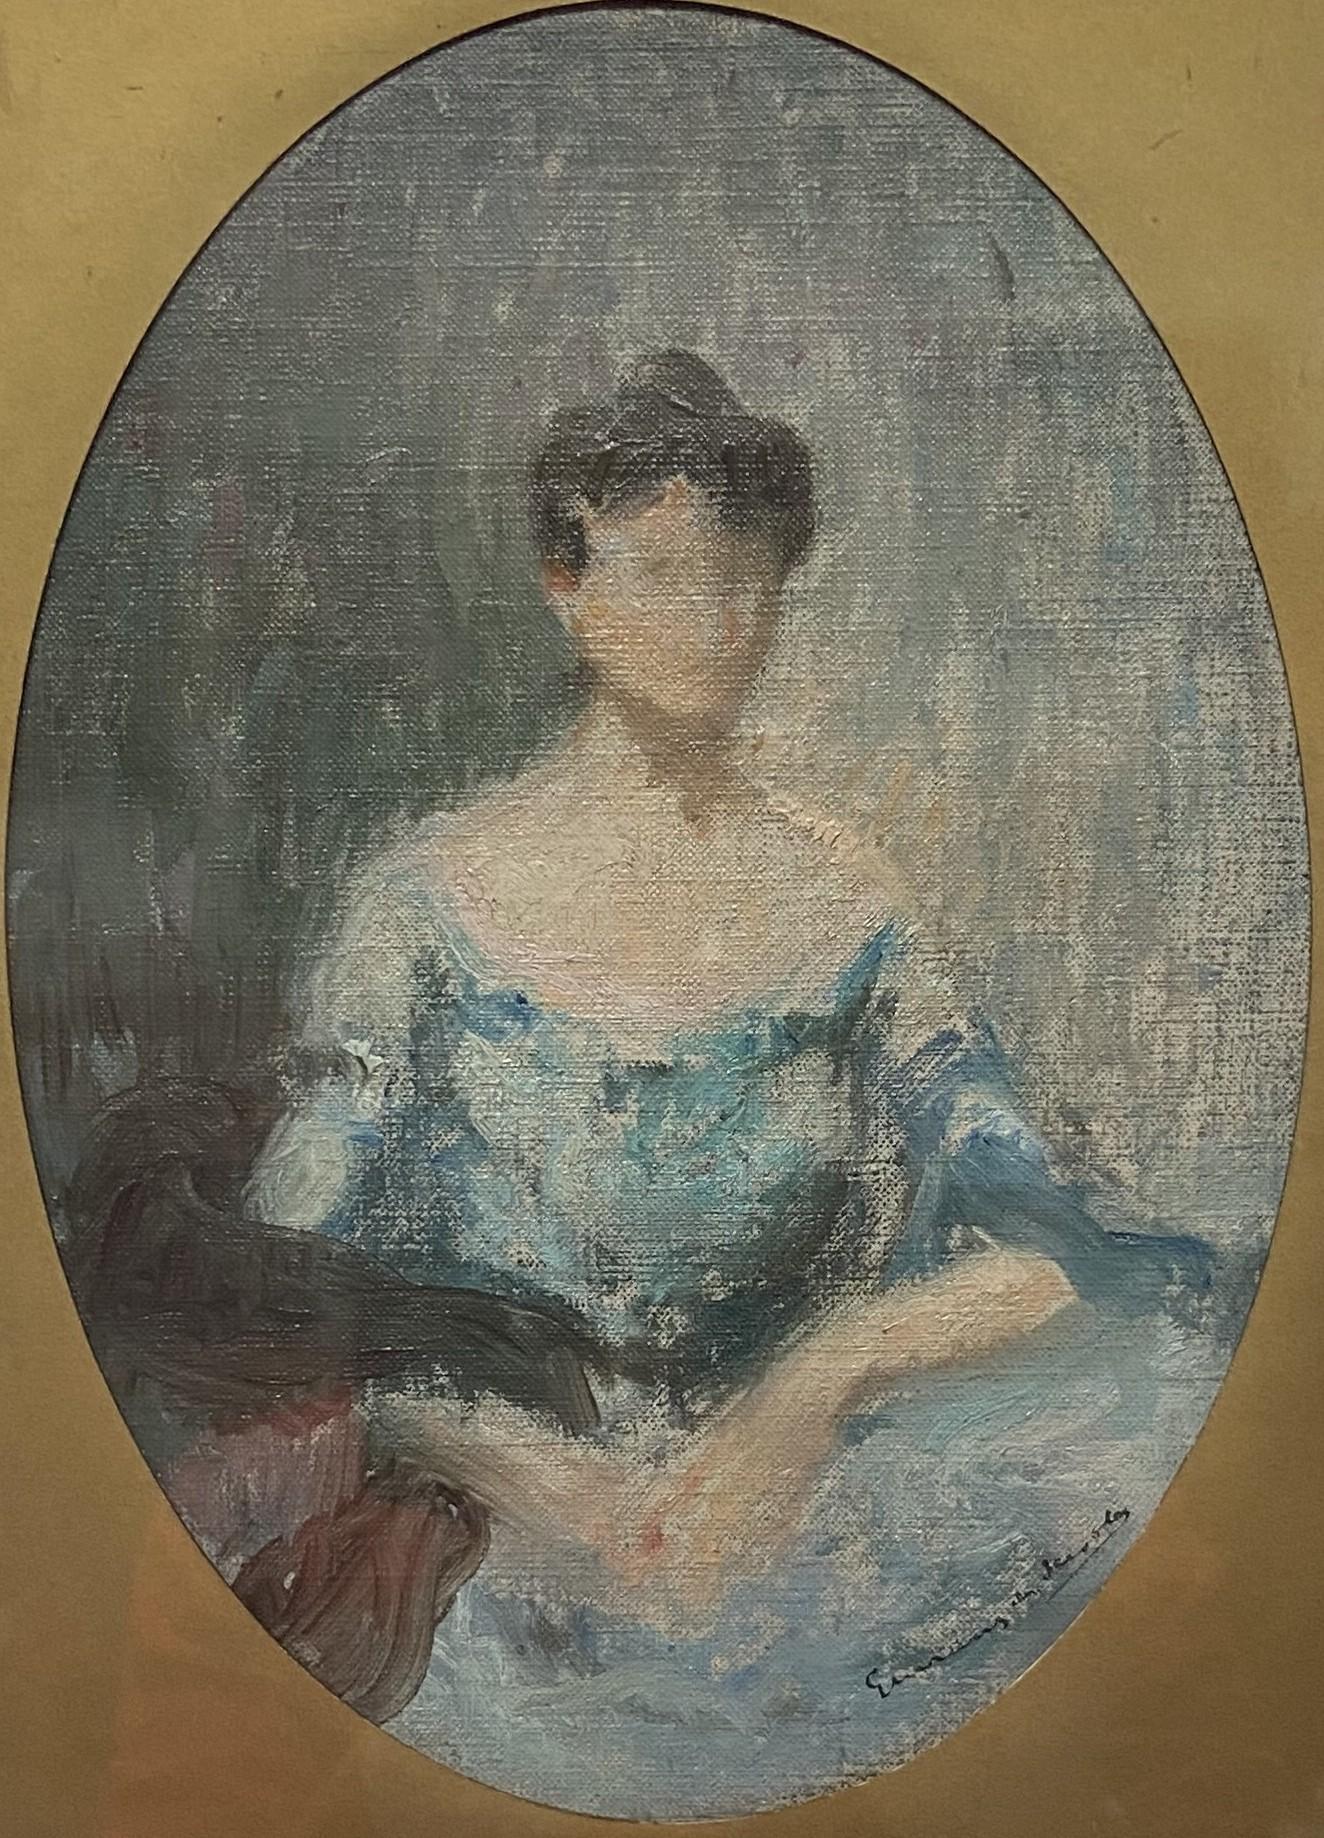 Lucien-Victor Guirand de Scévola ( 1871 – 1950)
Portrait of a lady, a sketch
signed lower right
Oil on canvas transfered on cardboard
25 x 18 cm oval
Framed : 31 x 24.5 cm

This portrait sketch was undoubtedly intended as a finished work by the